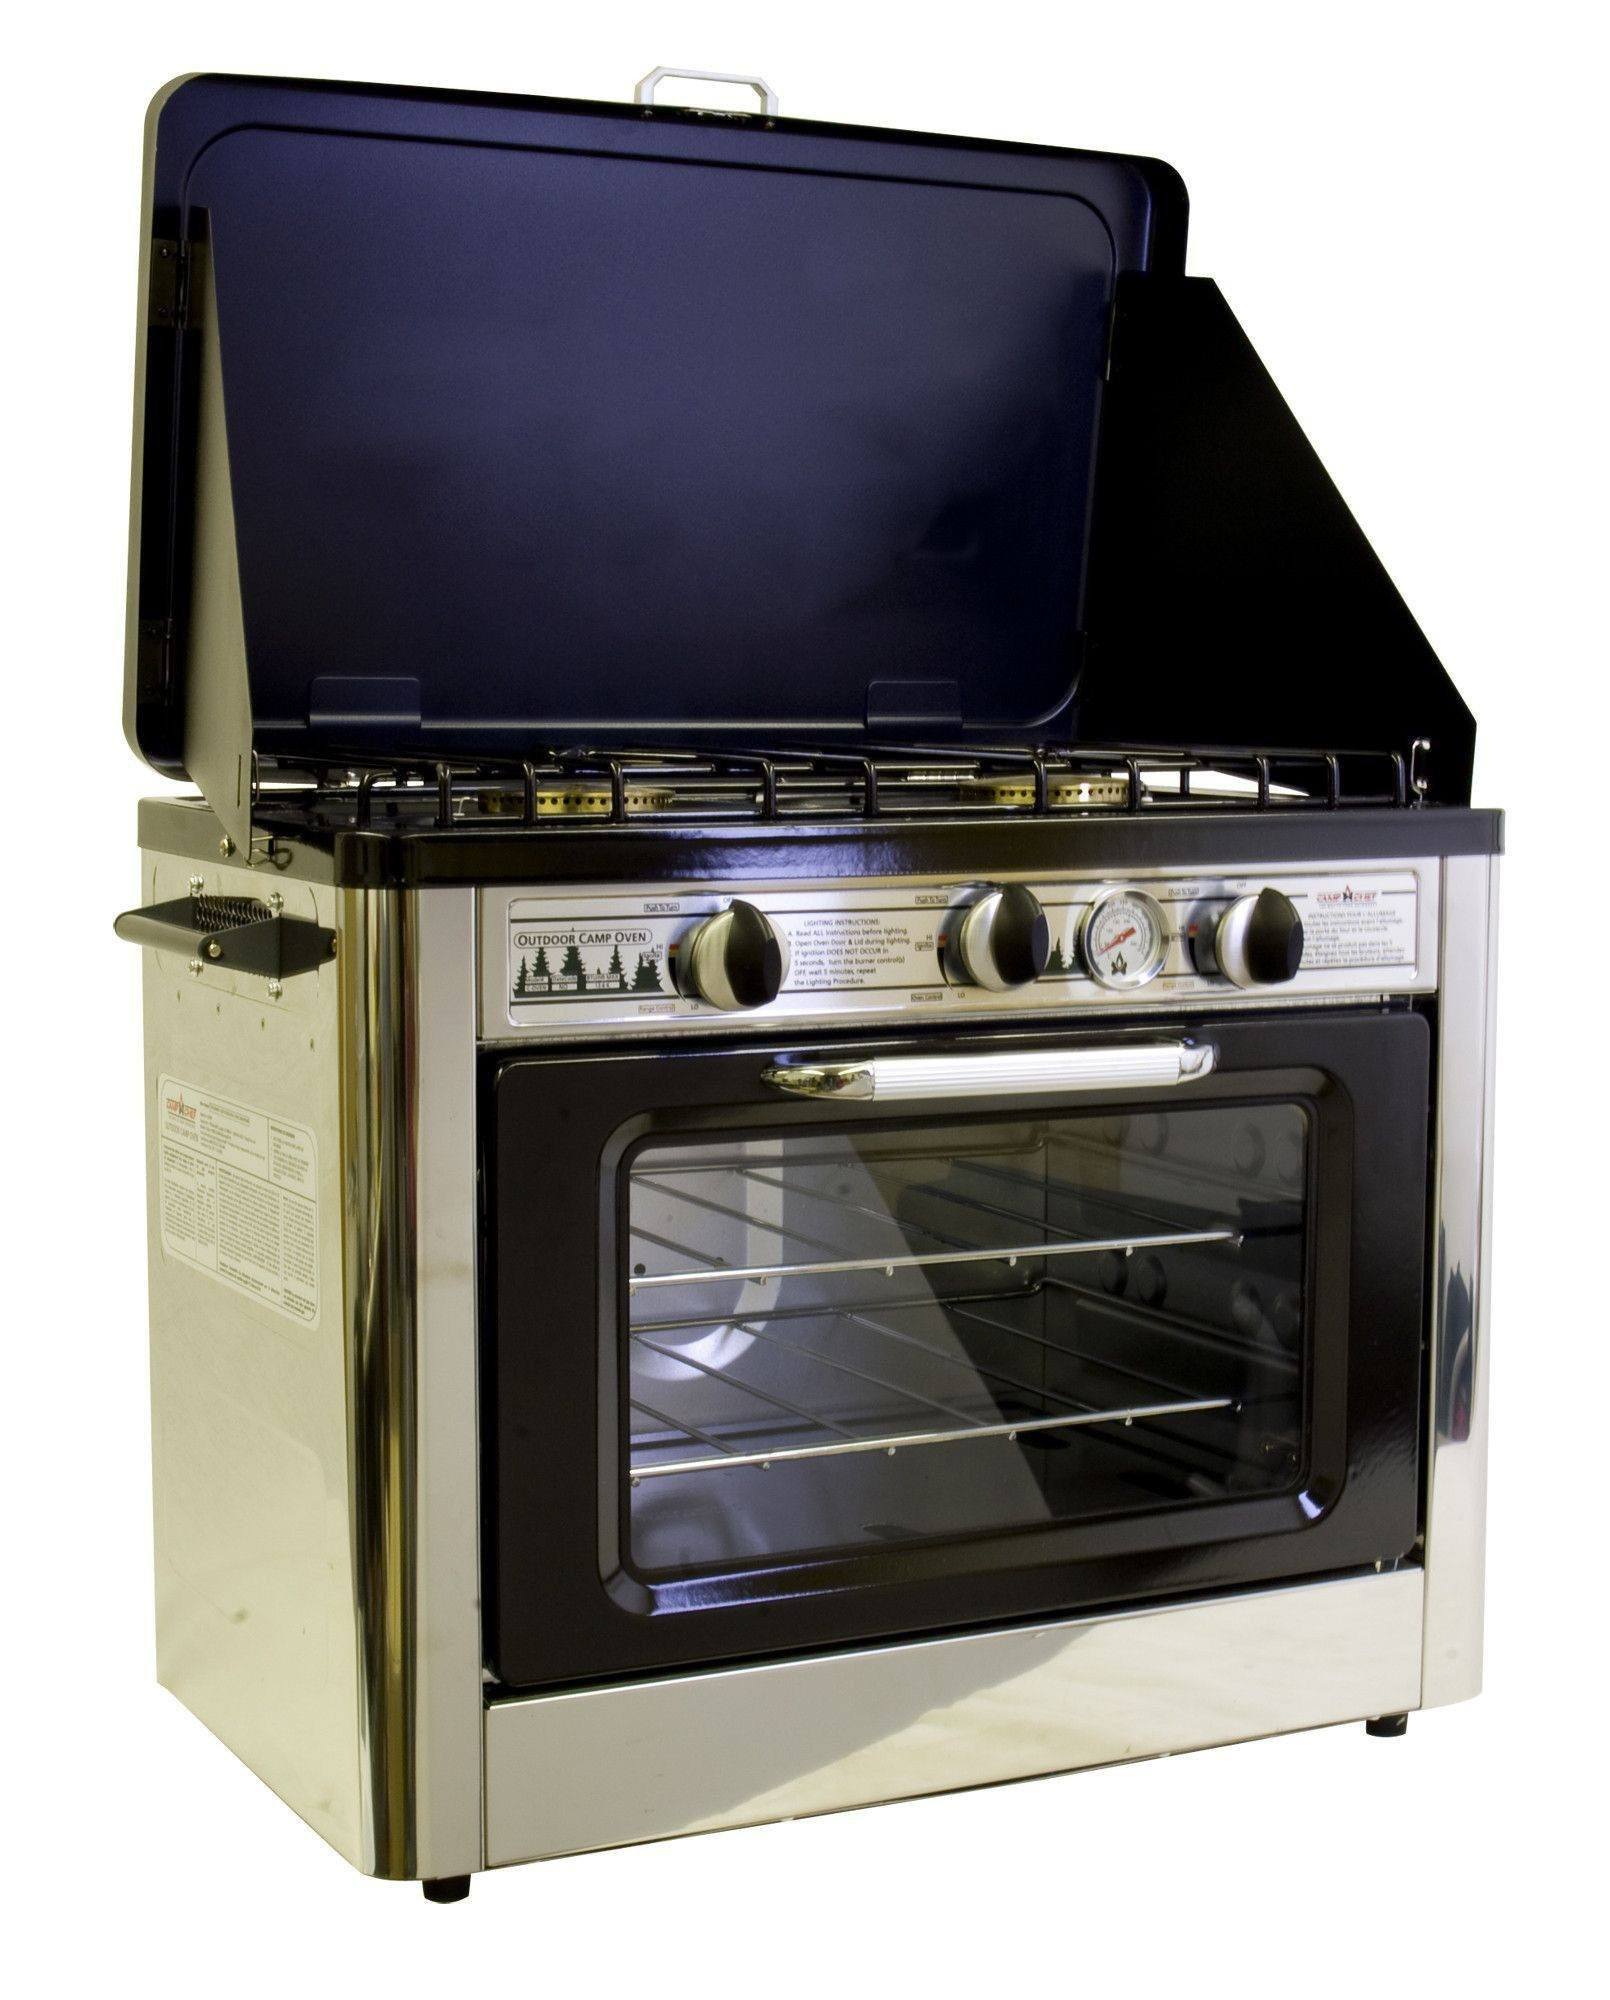 Camp Chef Deluxe Outdoor Oven camping cooking gear 